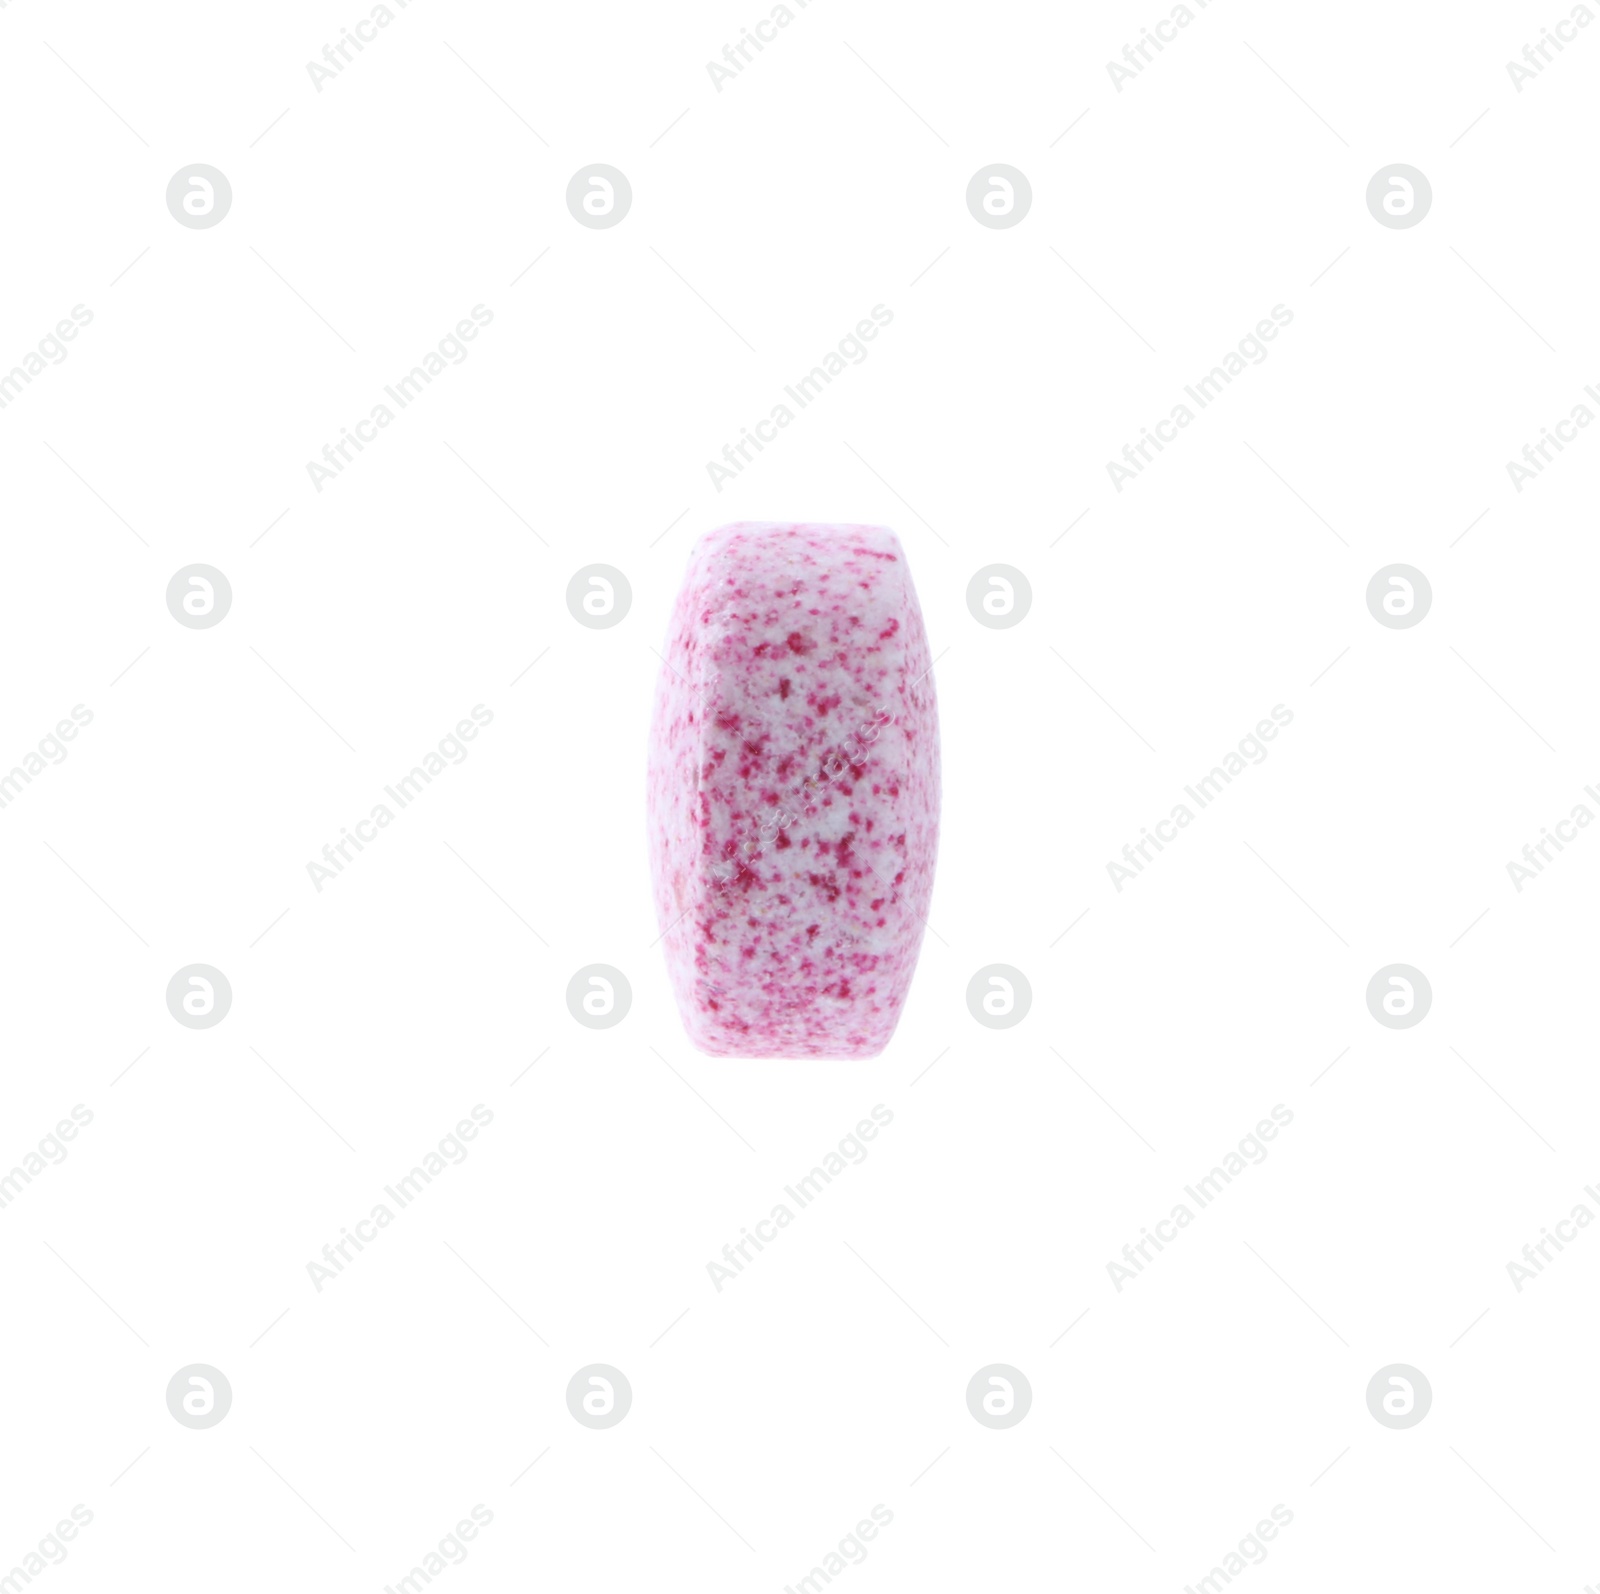 Photo of One vitamin pill isolated on white. Health supplement